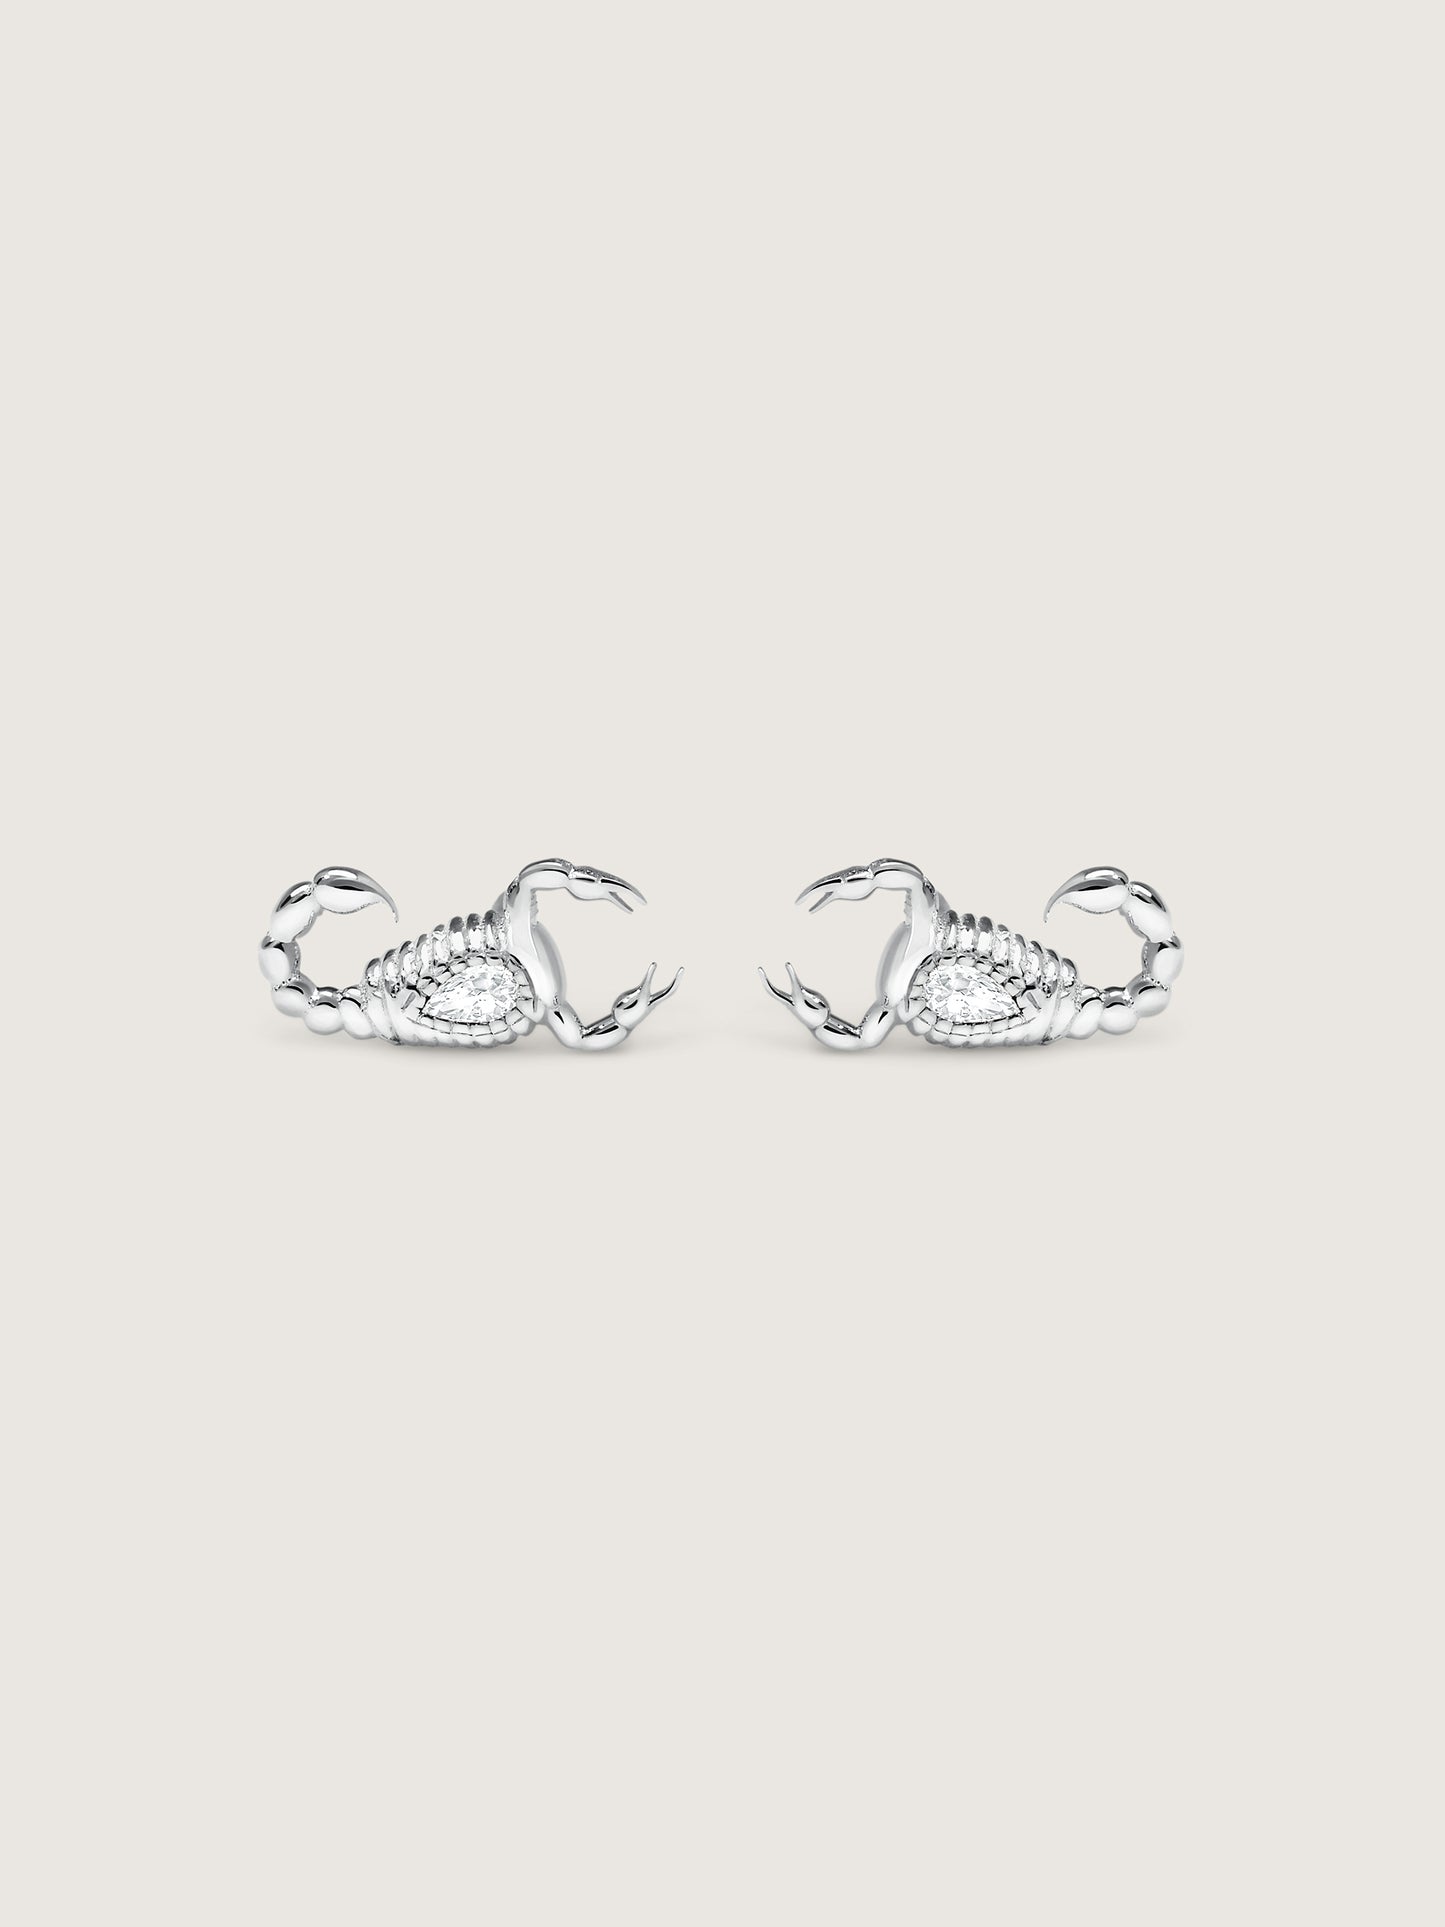 Doublemoss Skorppio 14k Gold & Pear Diamond Earrings. Passion and power these scorpion earrings will make a bold statement wherever they go.